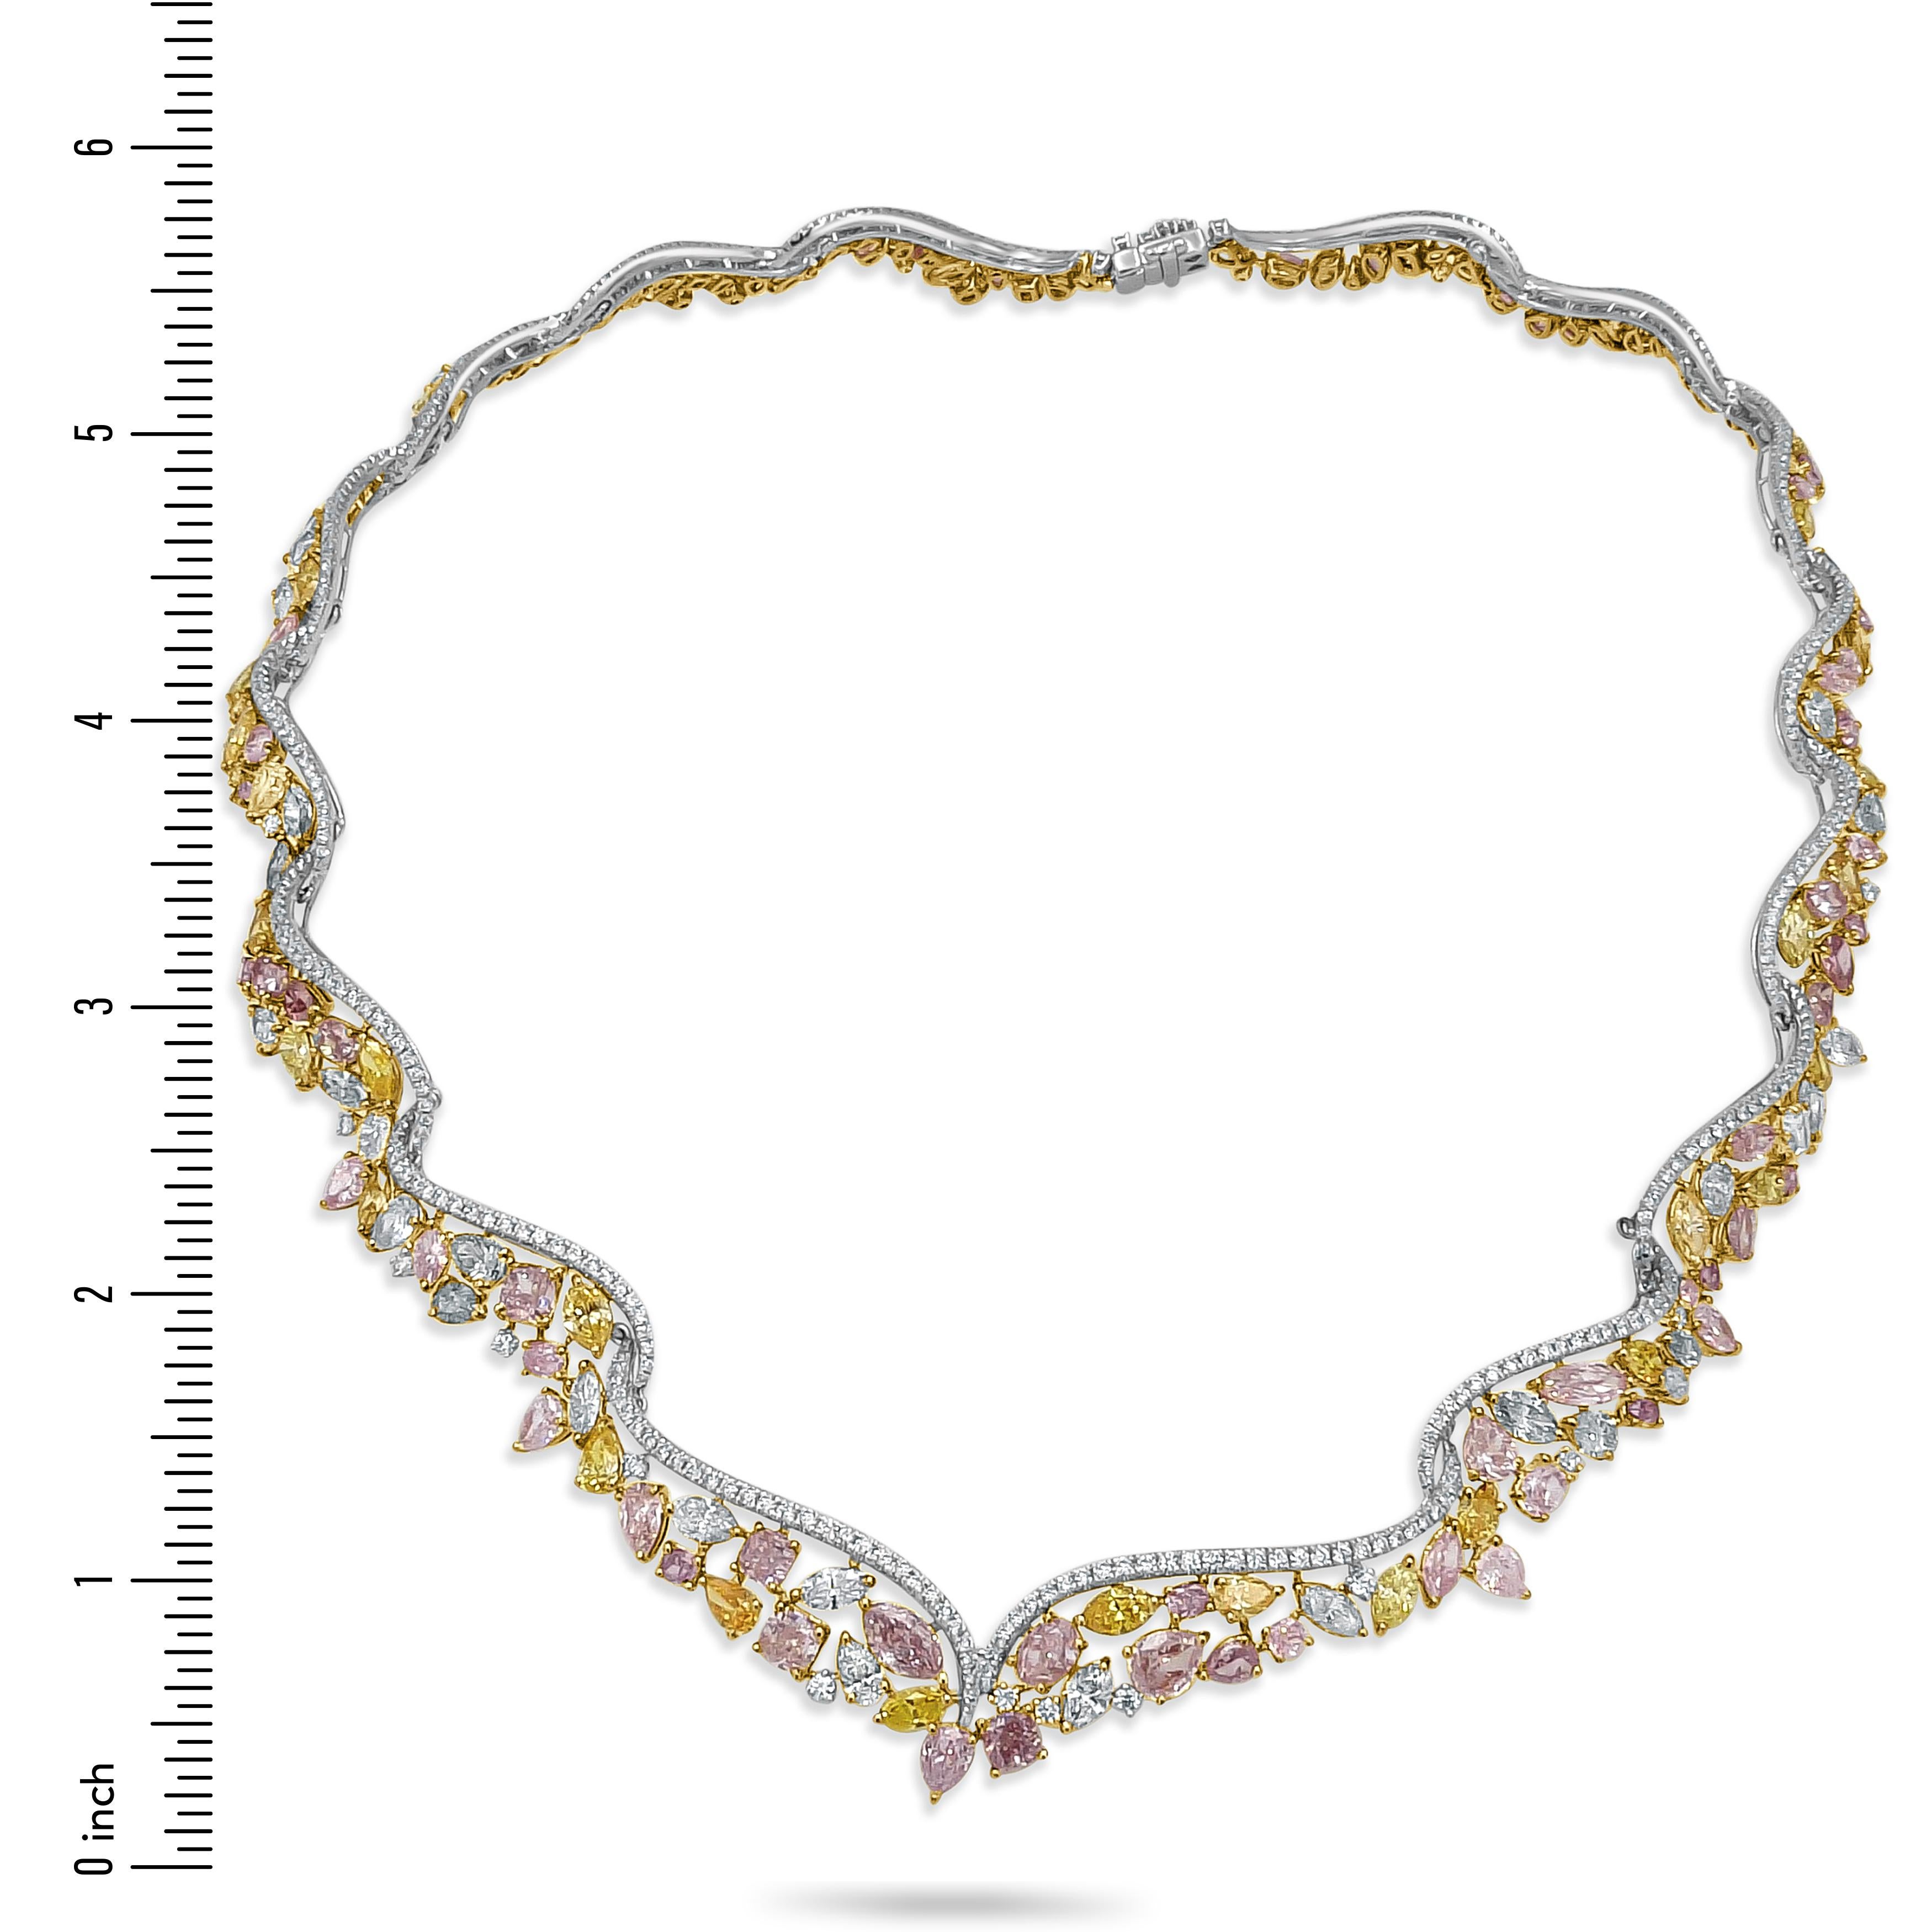 Women's GIA Certified 29.43 Carat Handcrafted Natural Color Diamond Tiara Necklace ref40 For Sale